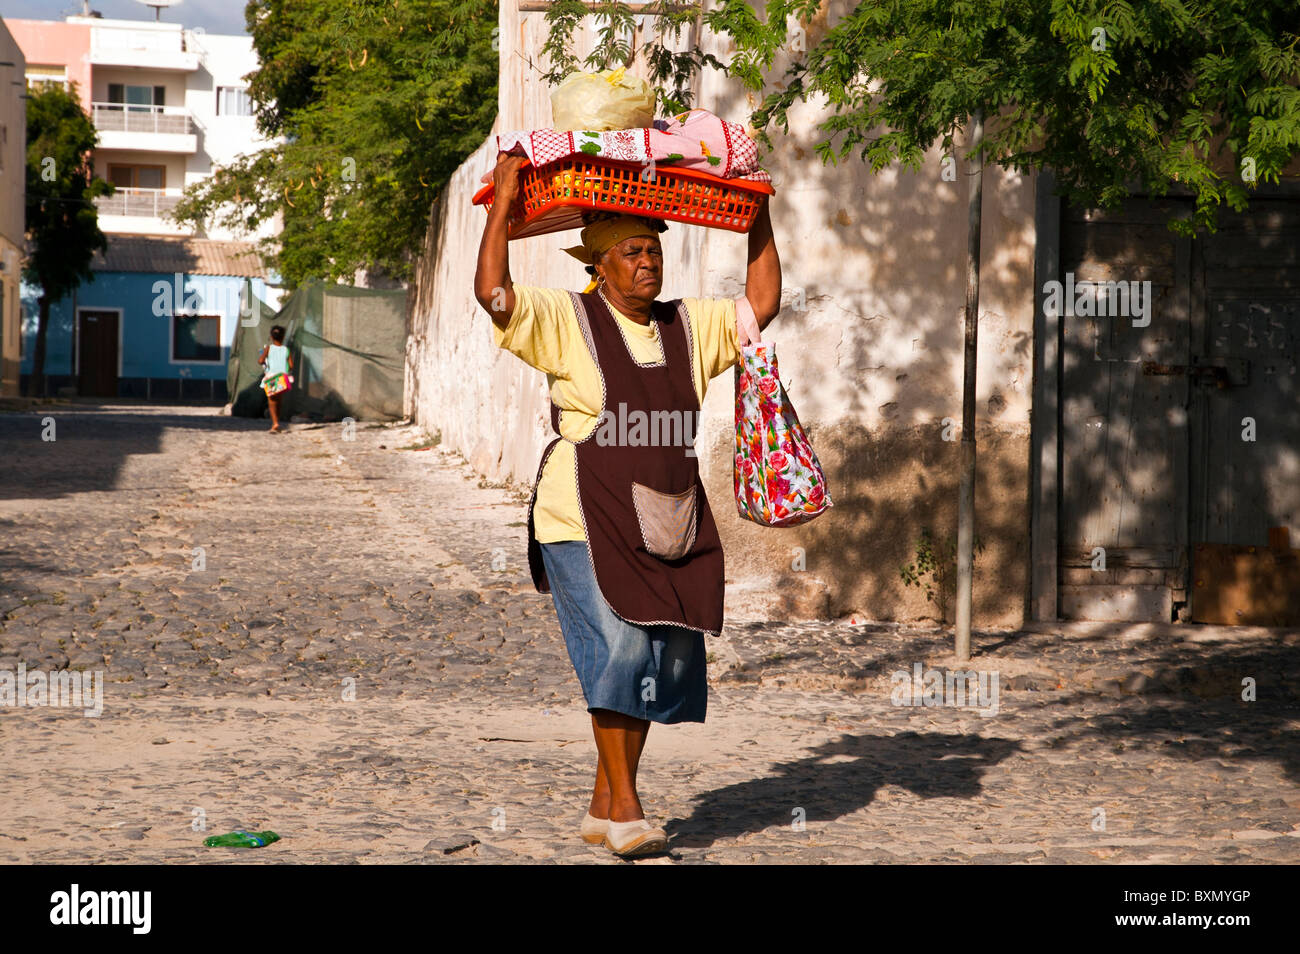 Woman carrying a basket on her head, Sal Rei, Boa Vista, Cape Verde Stock Photo